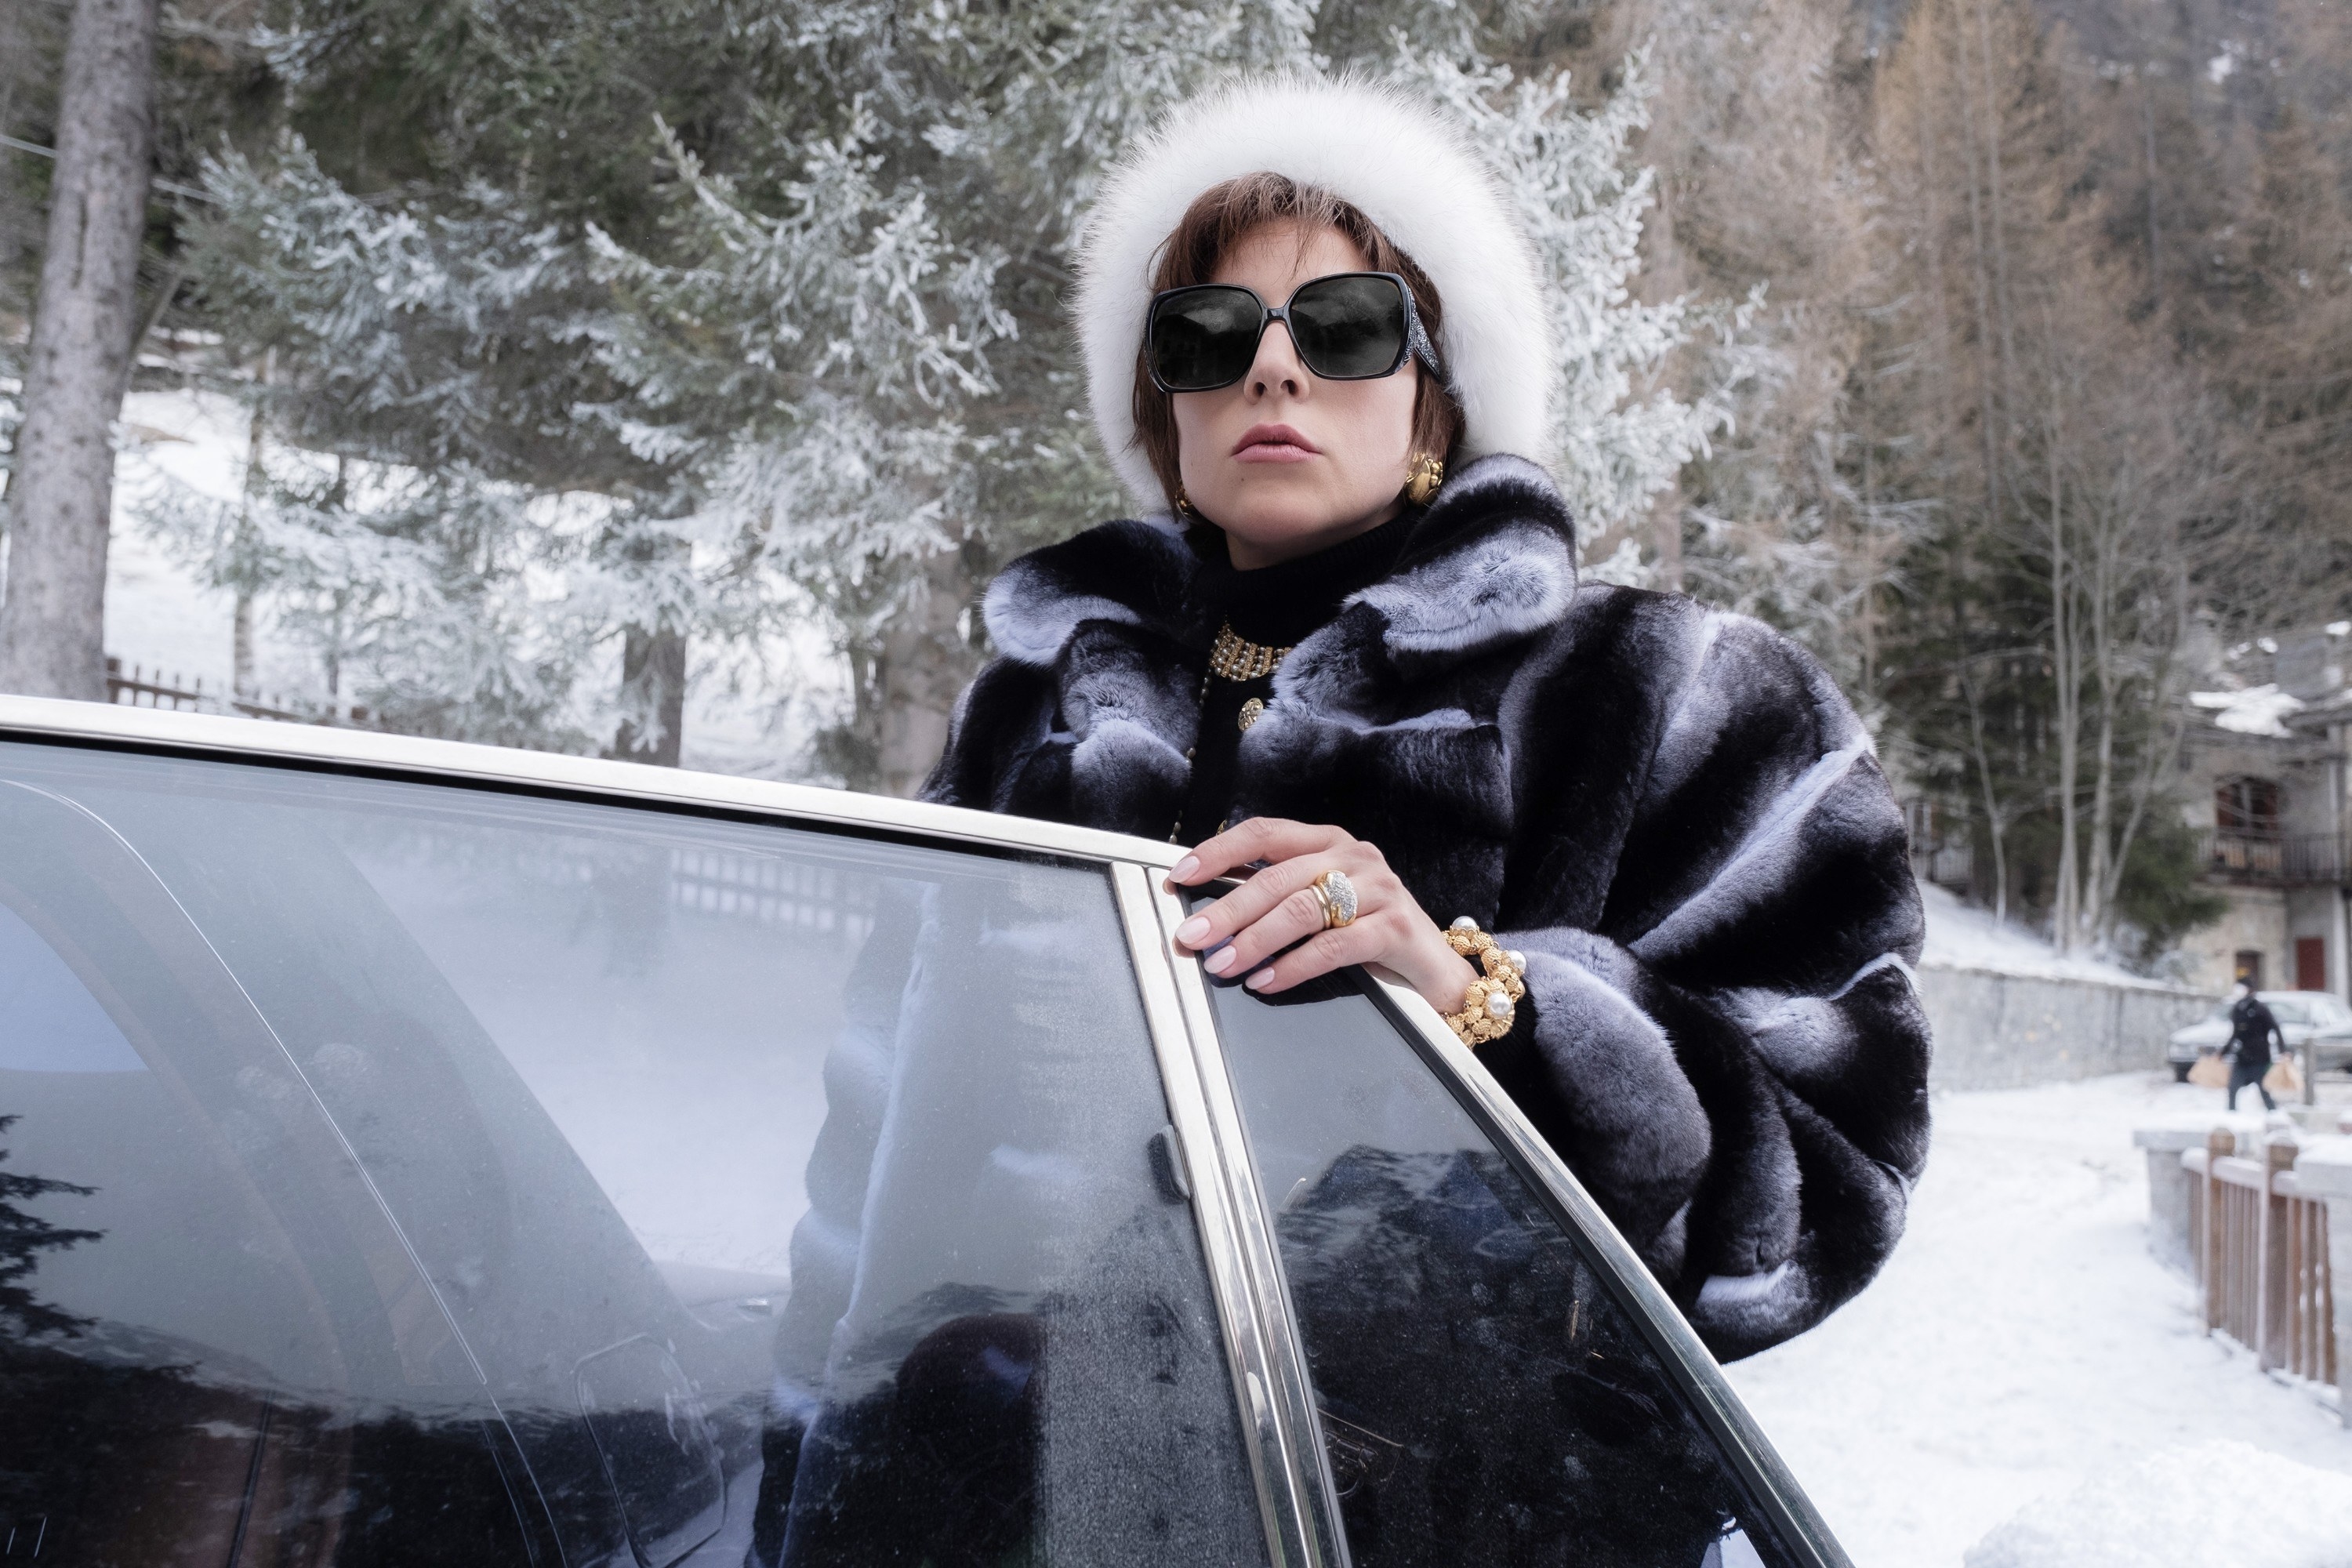 Lady Gaga stands in the snow outside a car